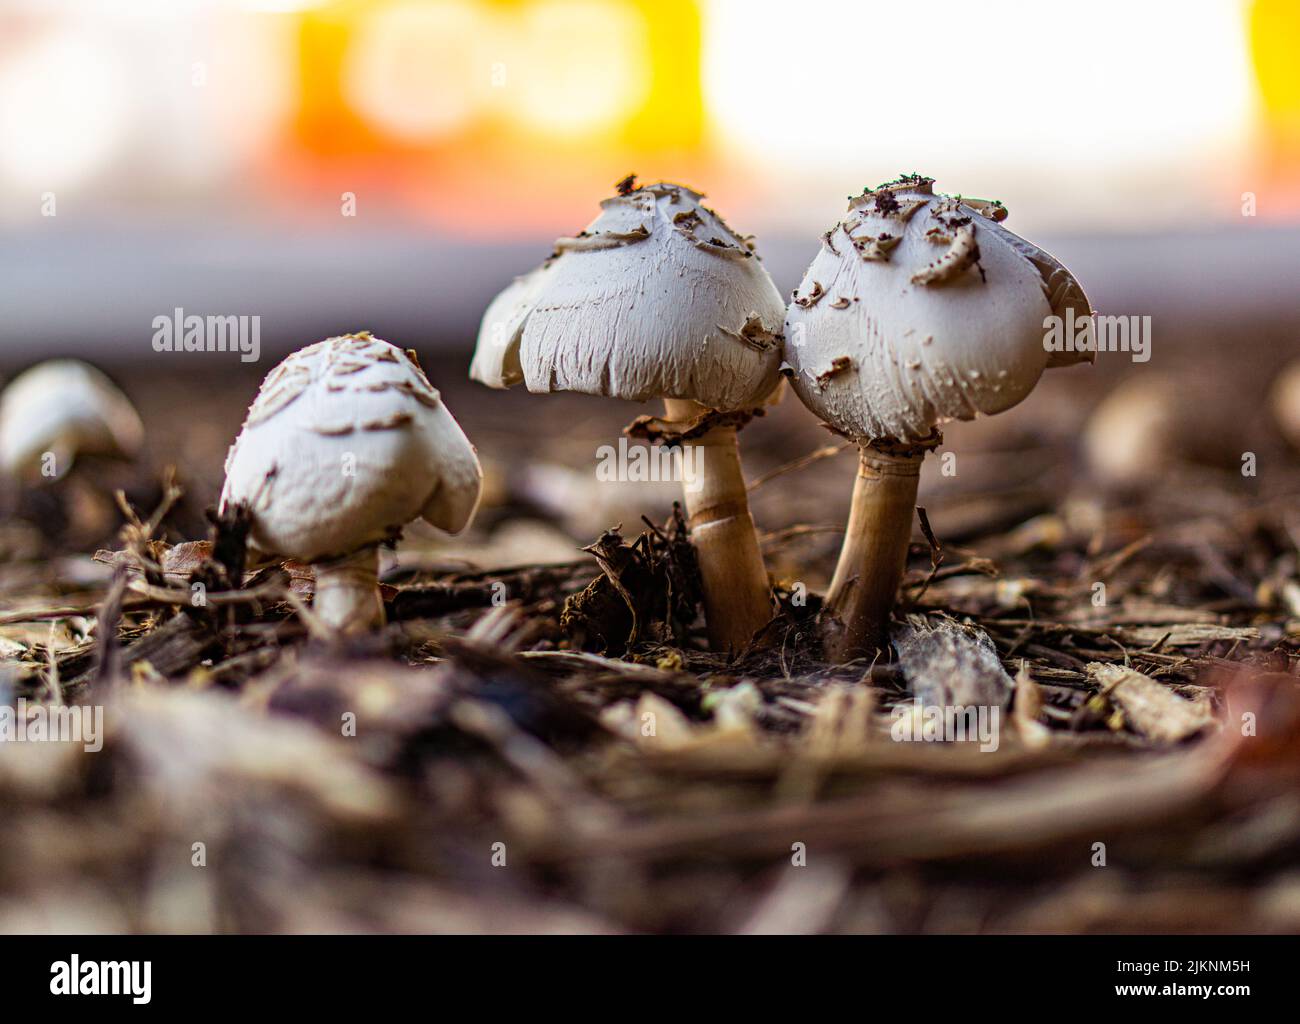 Growing coprinus alopecia mushrooms in a field Stock Photo